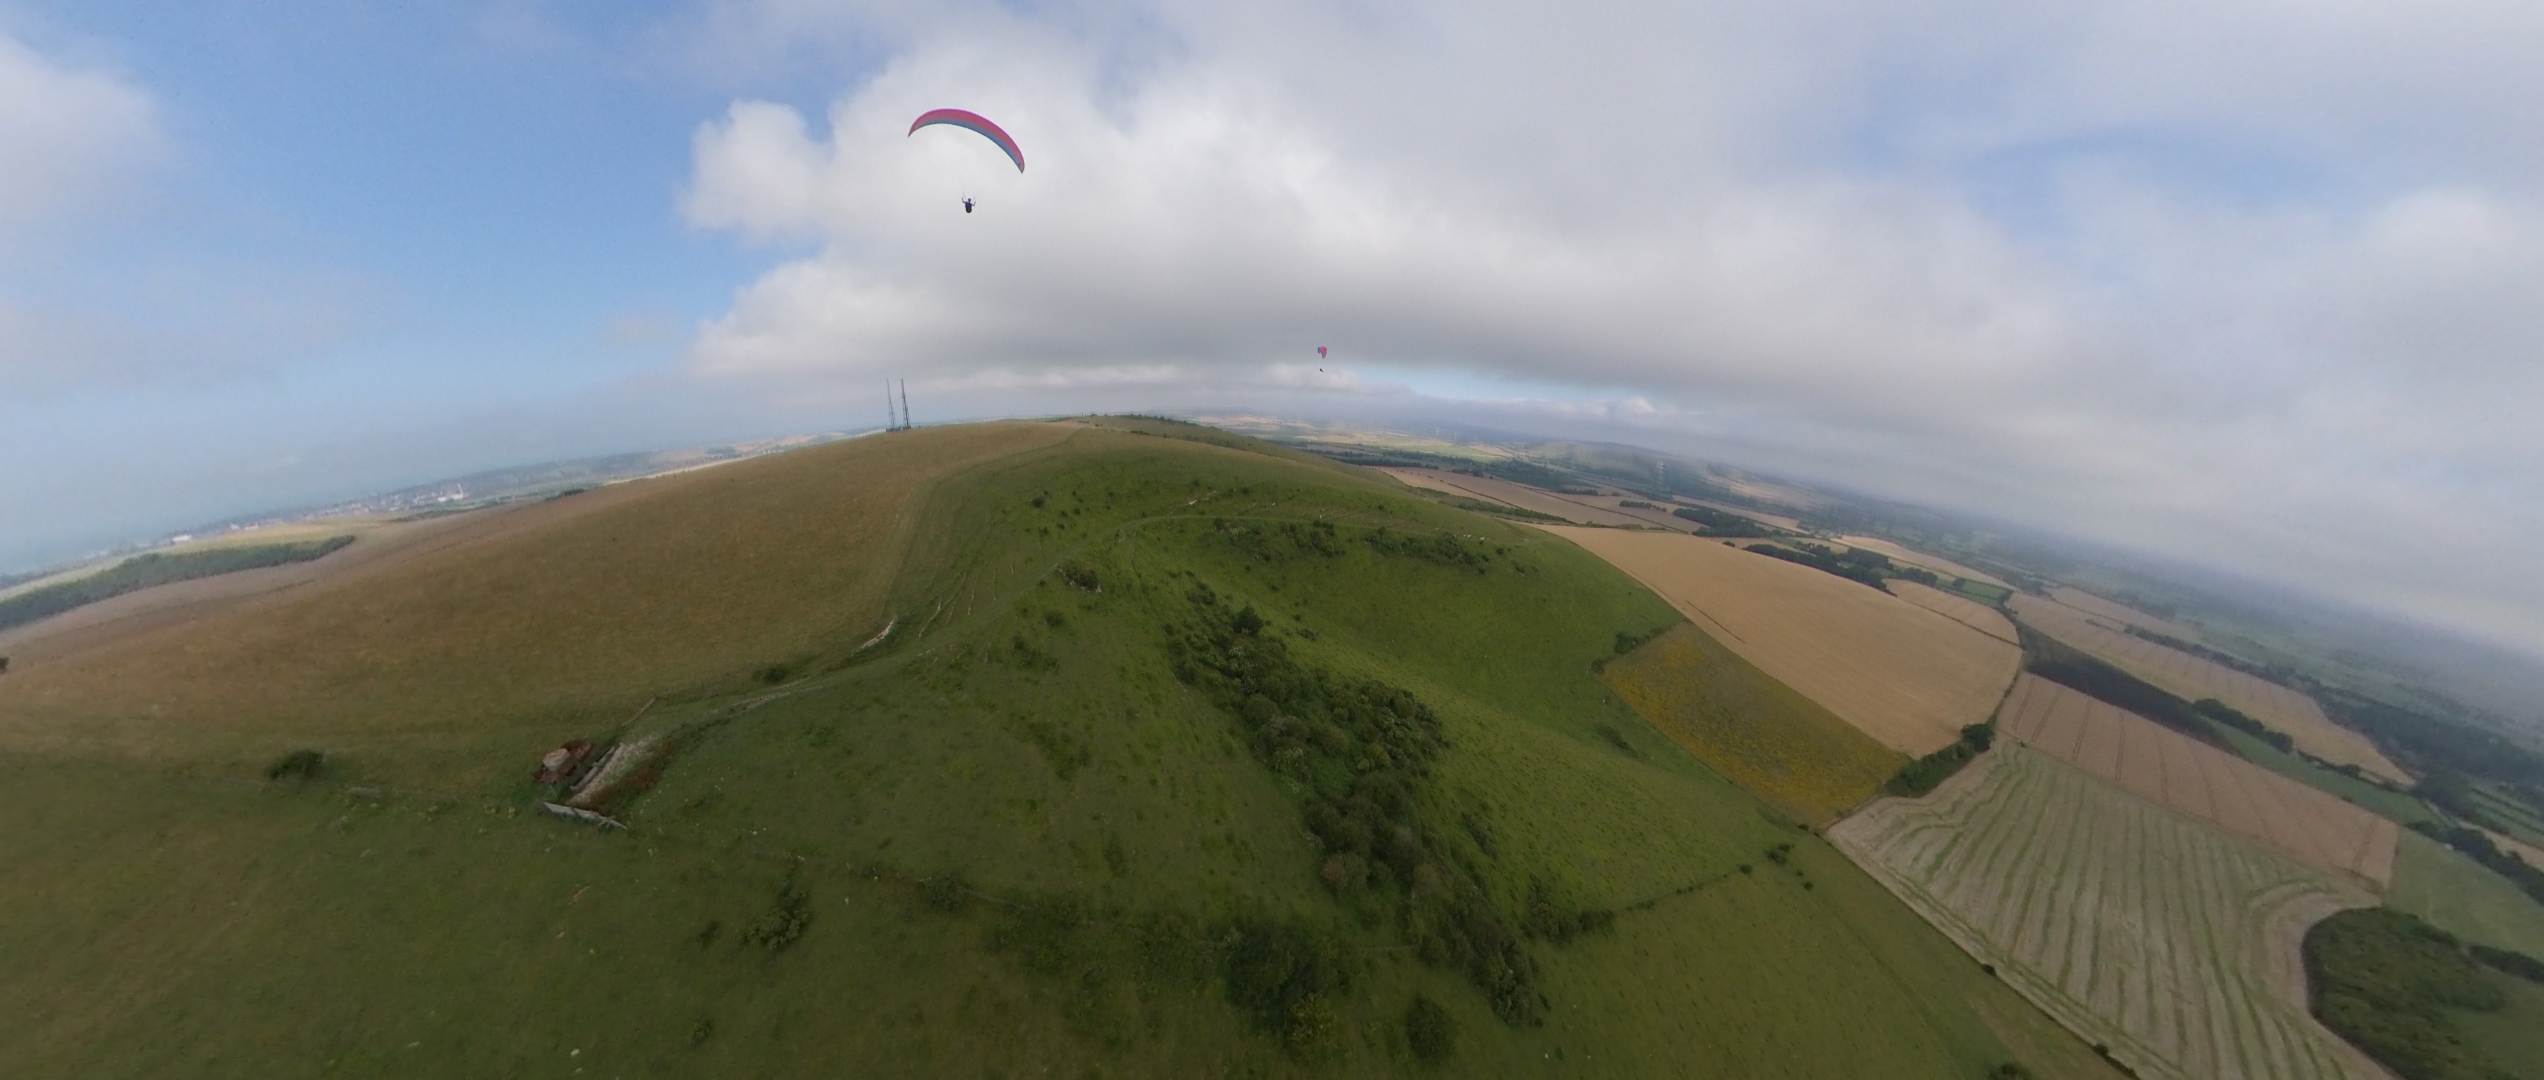 Tandem paragliding on the Sussex Downs in East Sussex